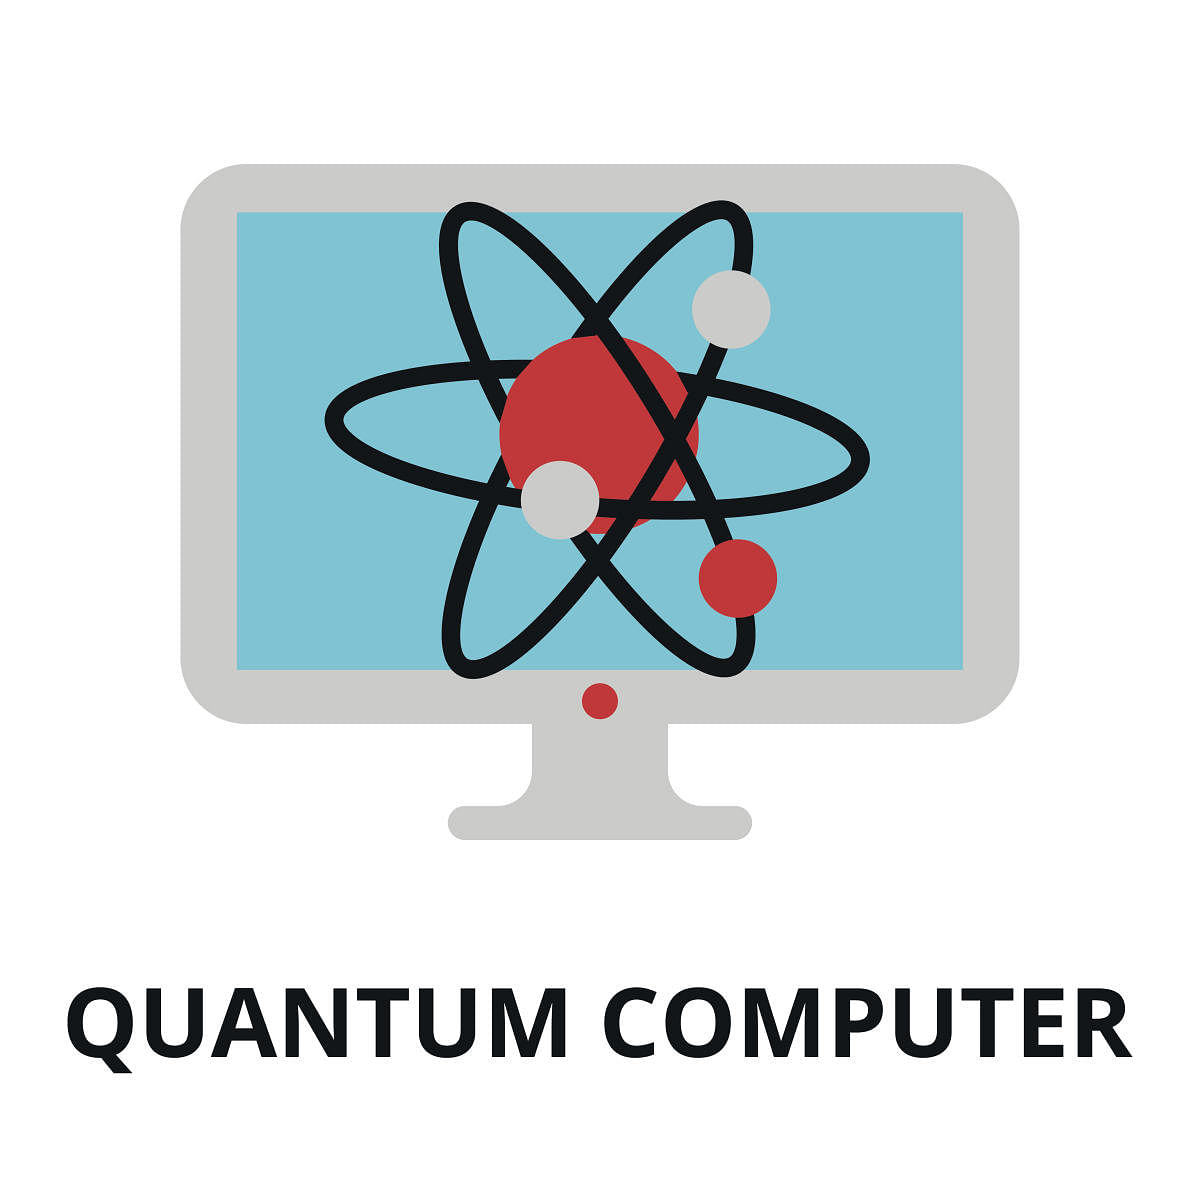 'Quantum computers may not be in the market in 10 yrs'